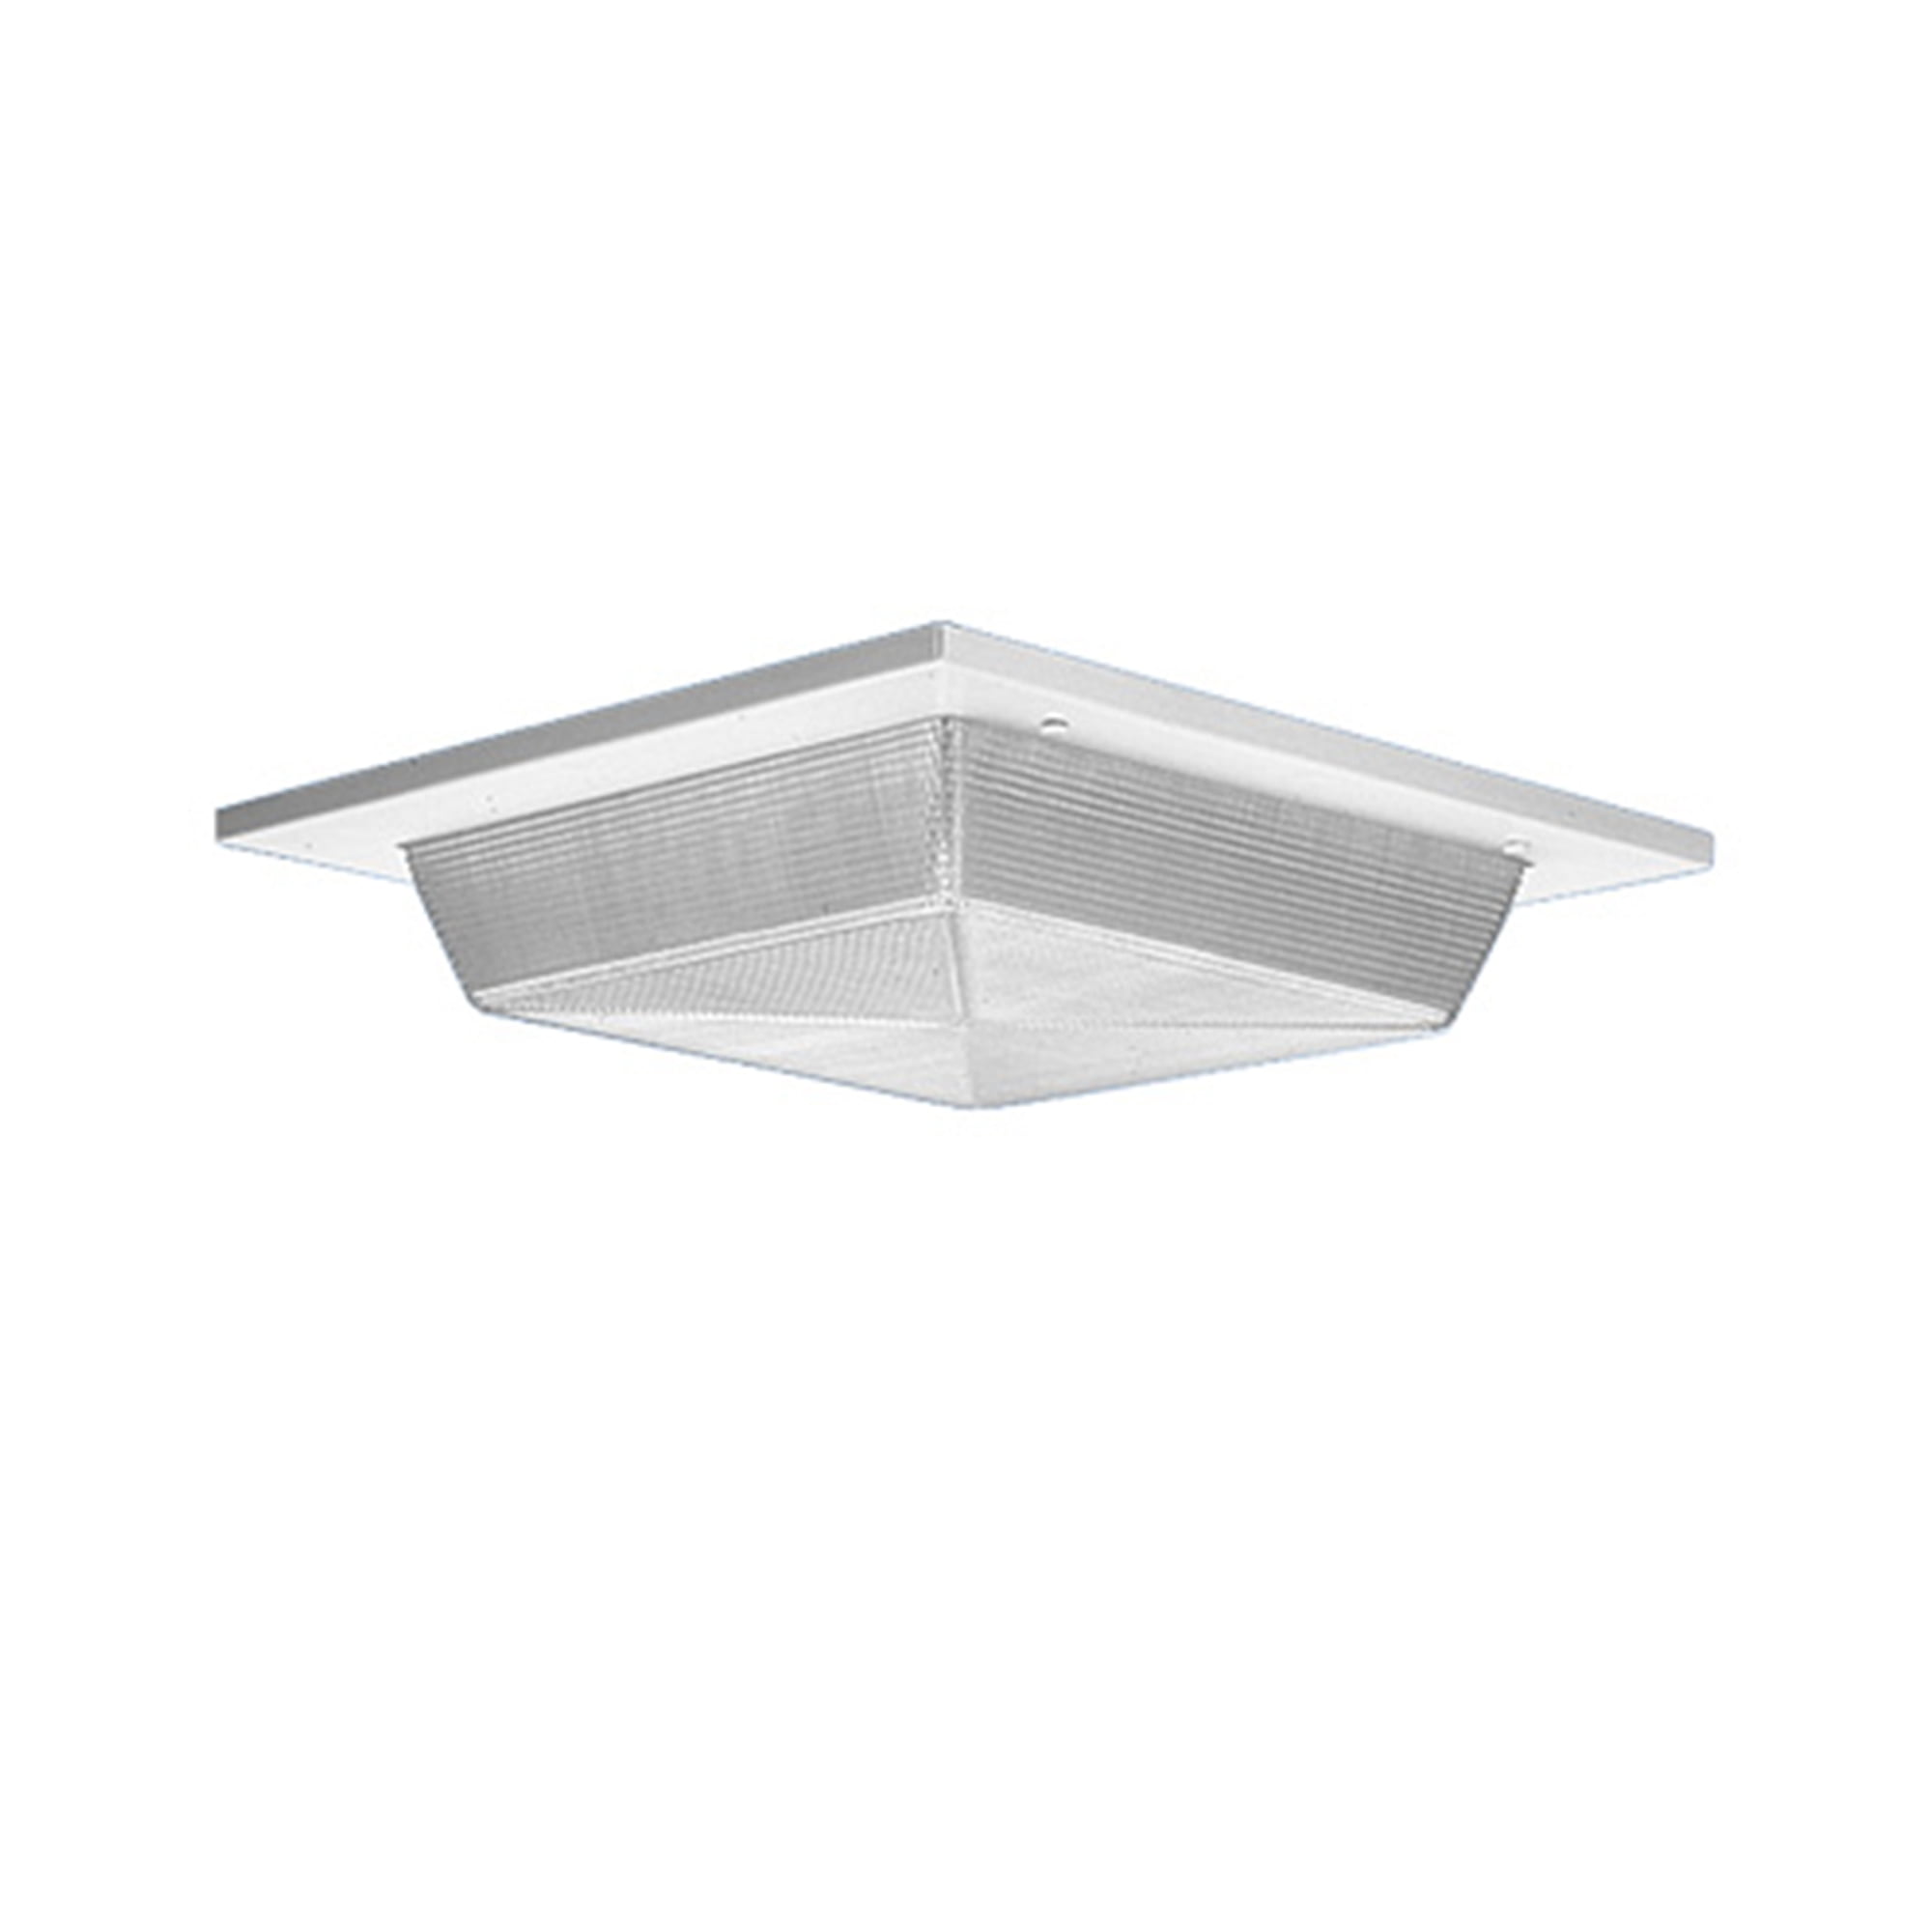 Lithonia Vrr 2/26 Dtt Recessed Housing Compact Fluorescent Ceiling Wall Mount Light Fixture